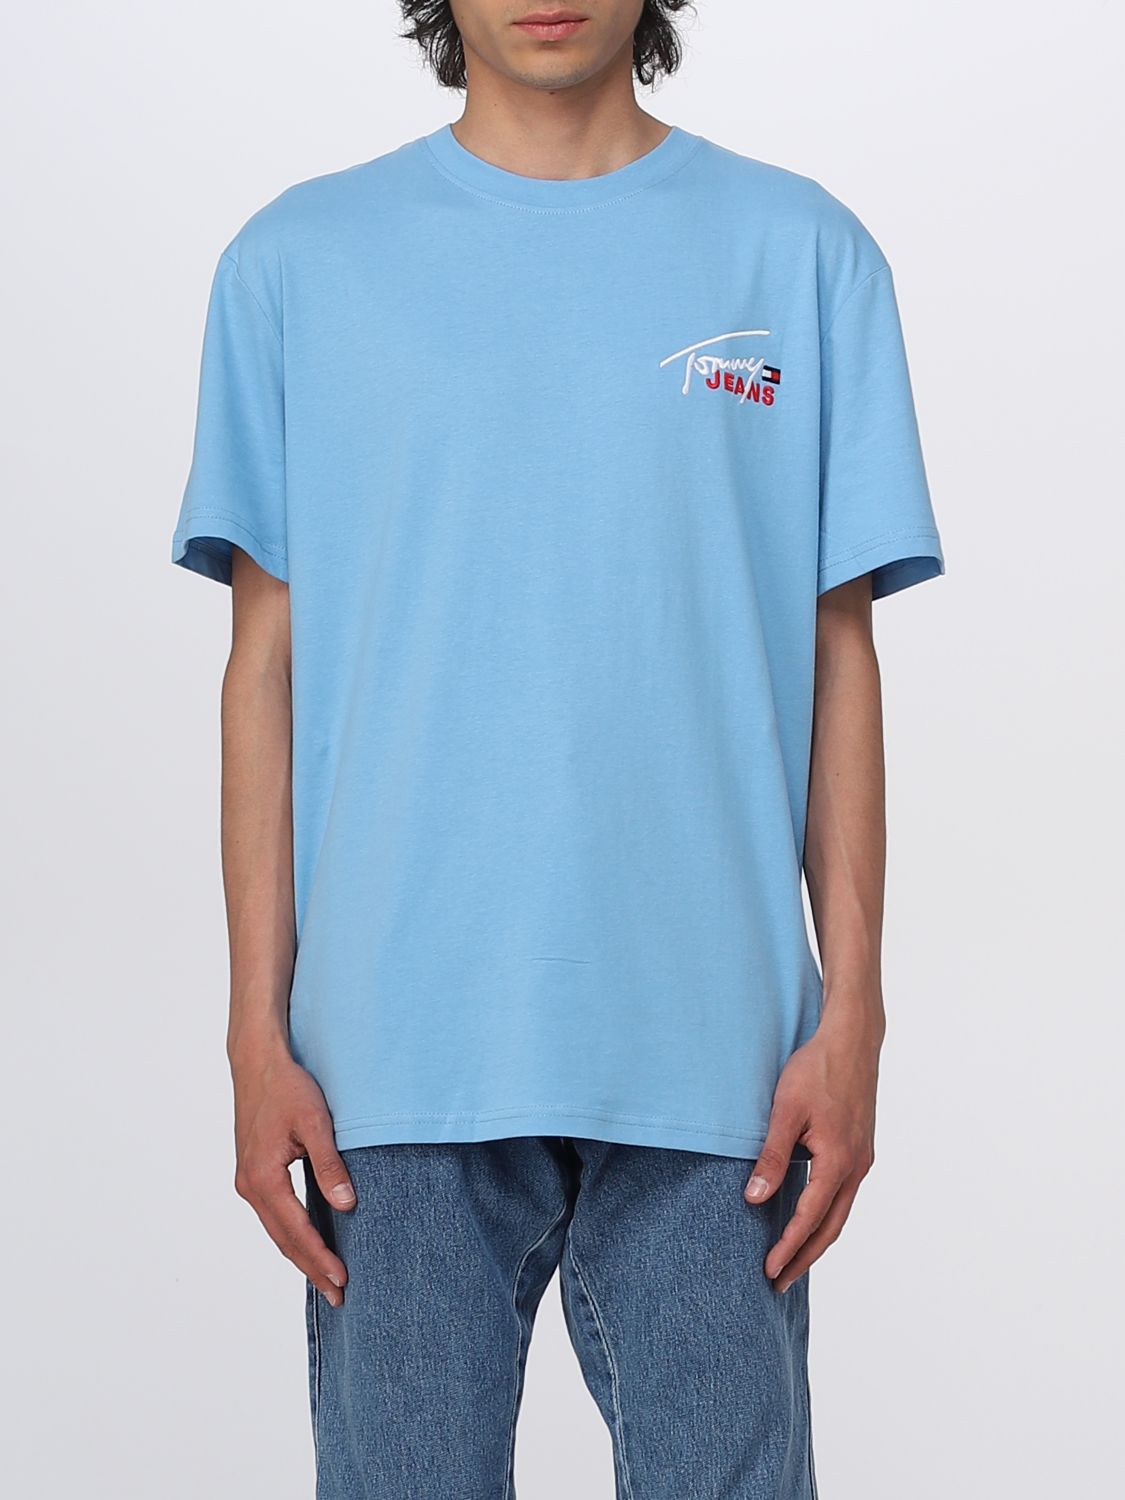 TOMMY JEANS: t-shirt for man - Sky Blue | Tommy Jeans t-shirt ...